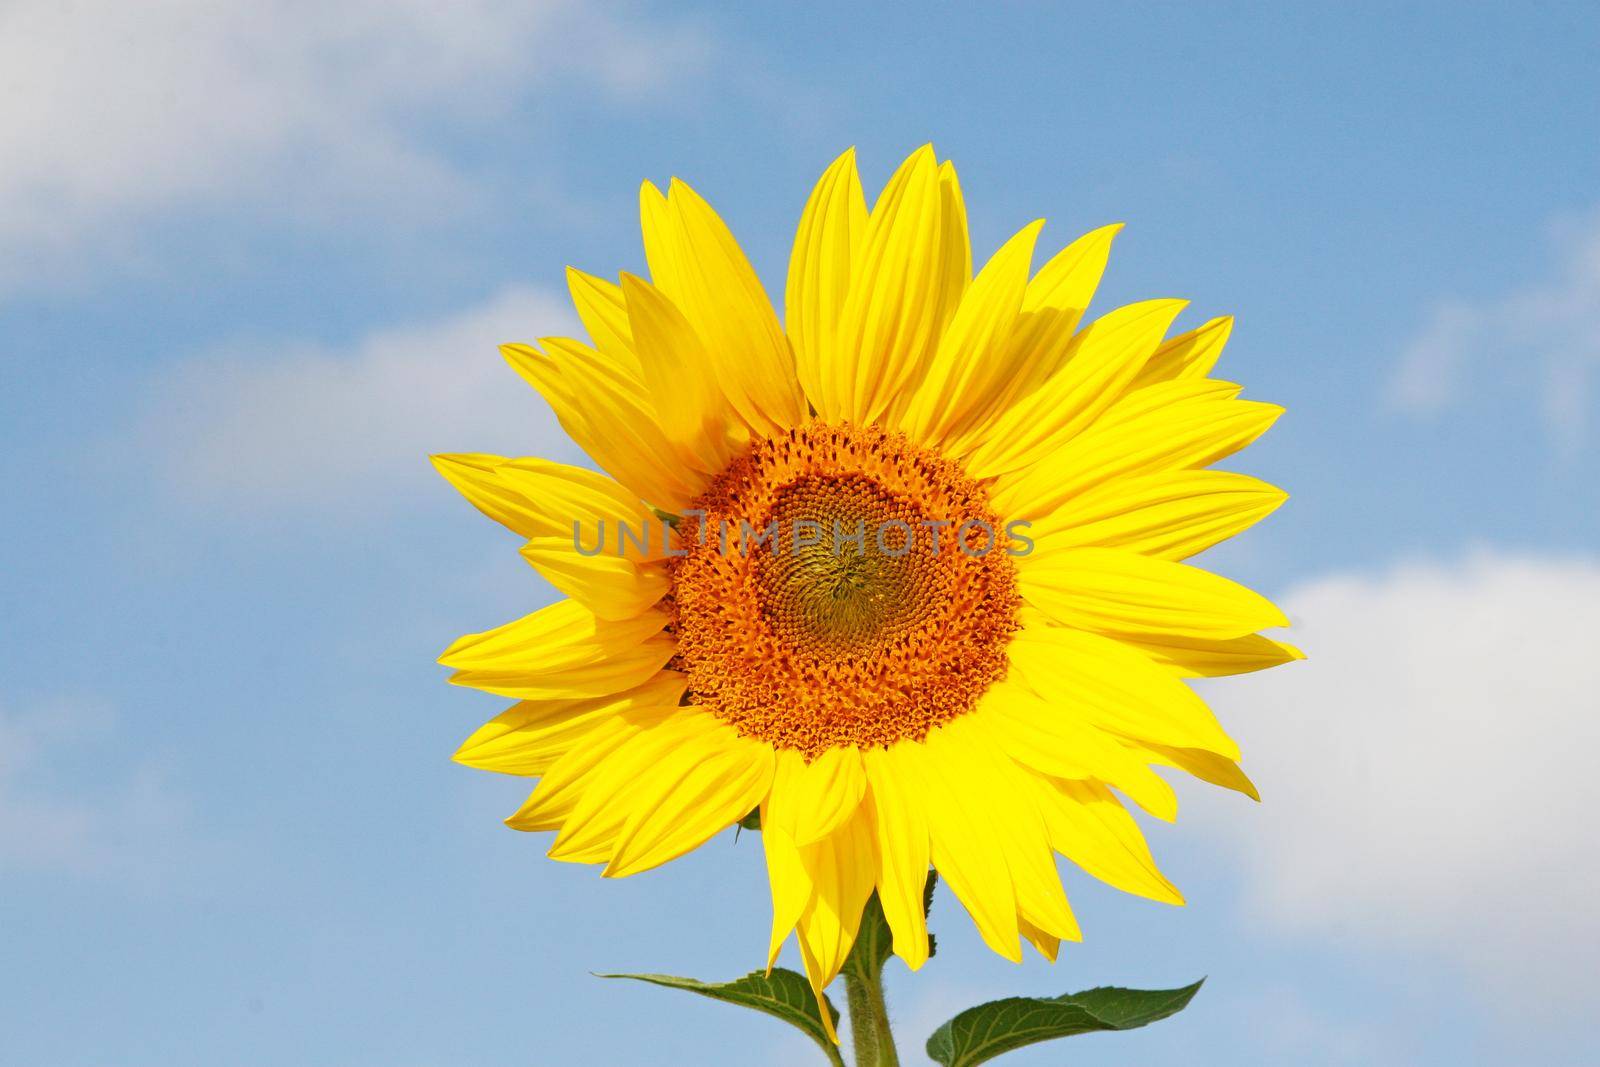 Close-up of fresh sunflower against clear blue sky